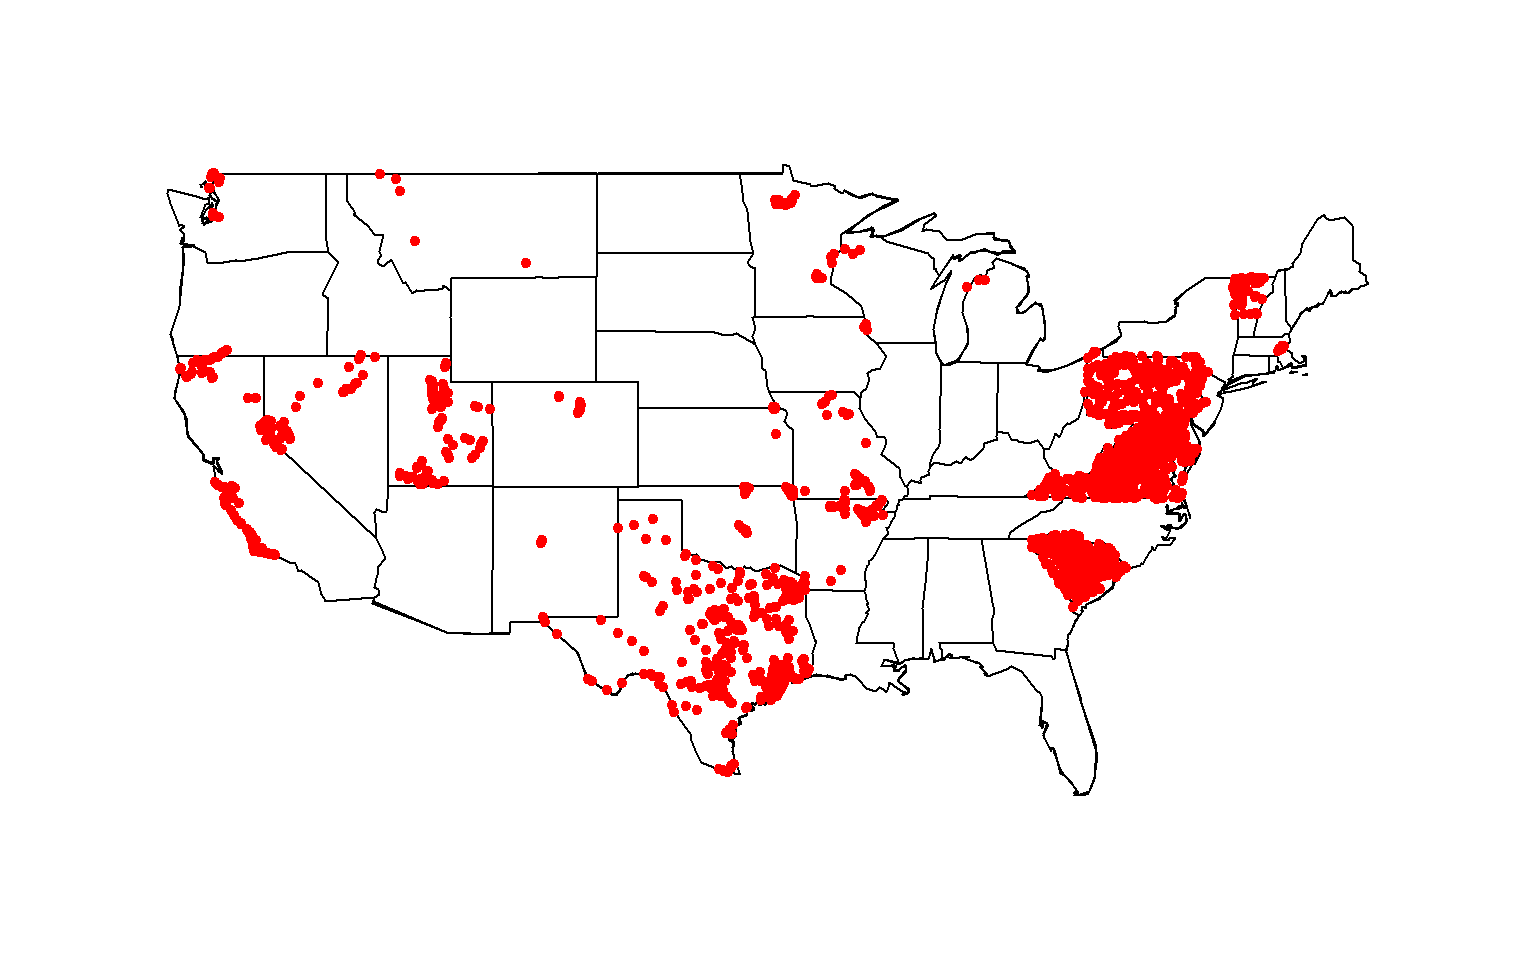 Total nitrogen data available at stream site locationed throughout the contiguous United States, 1995-2020